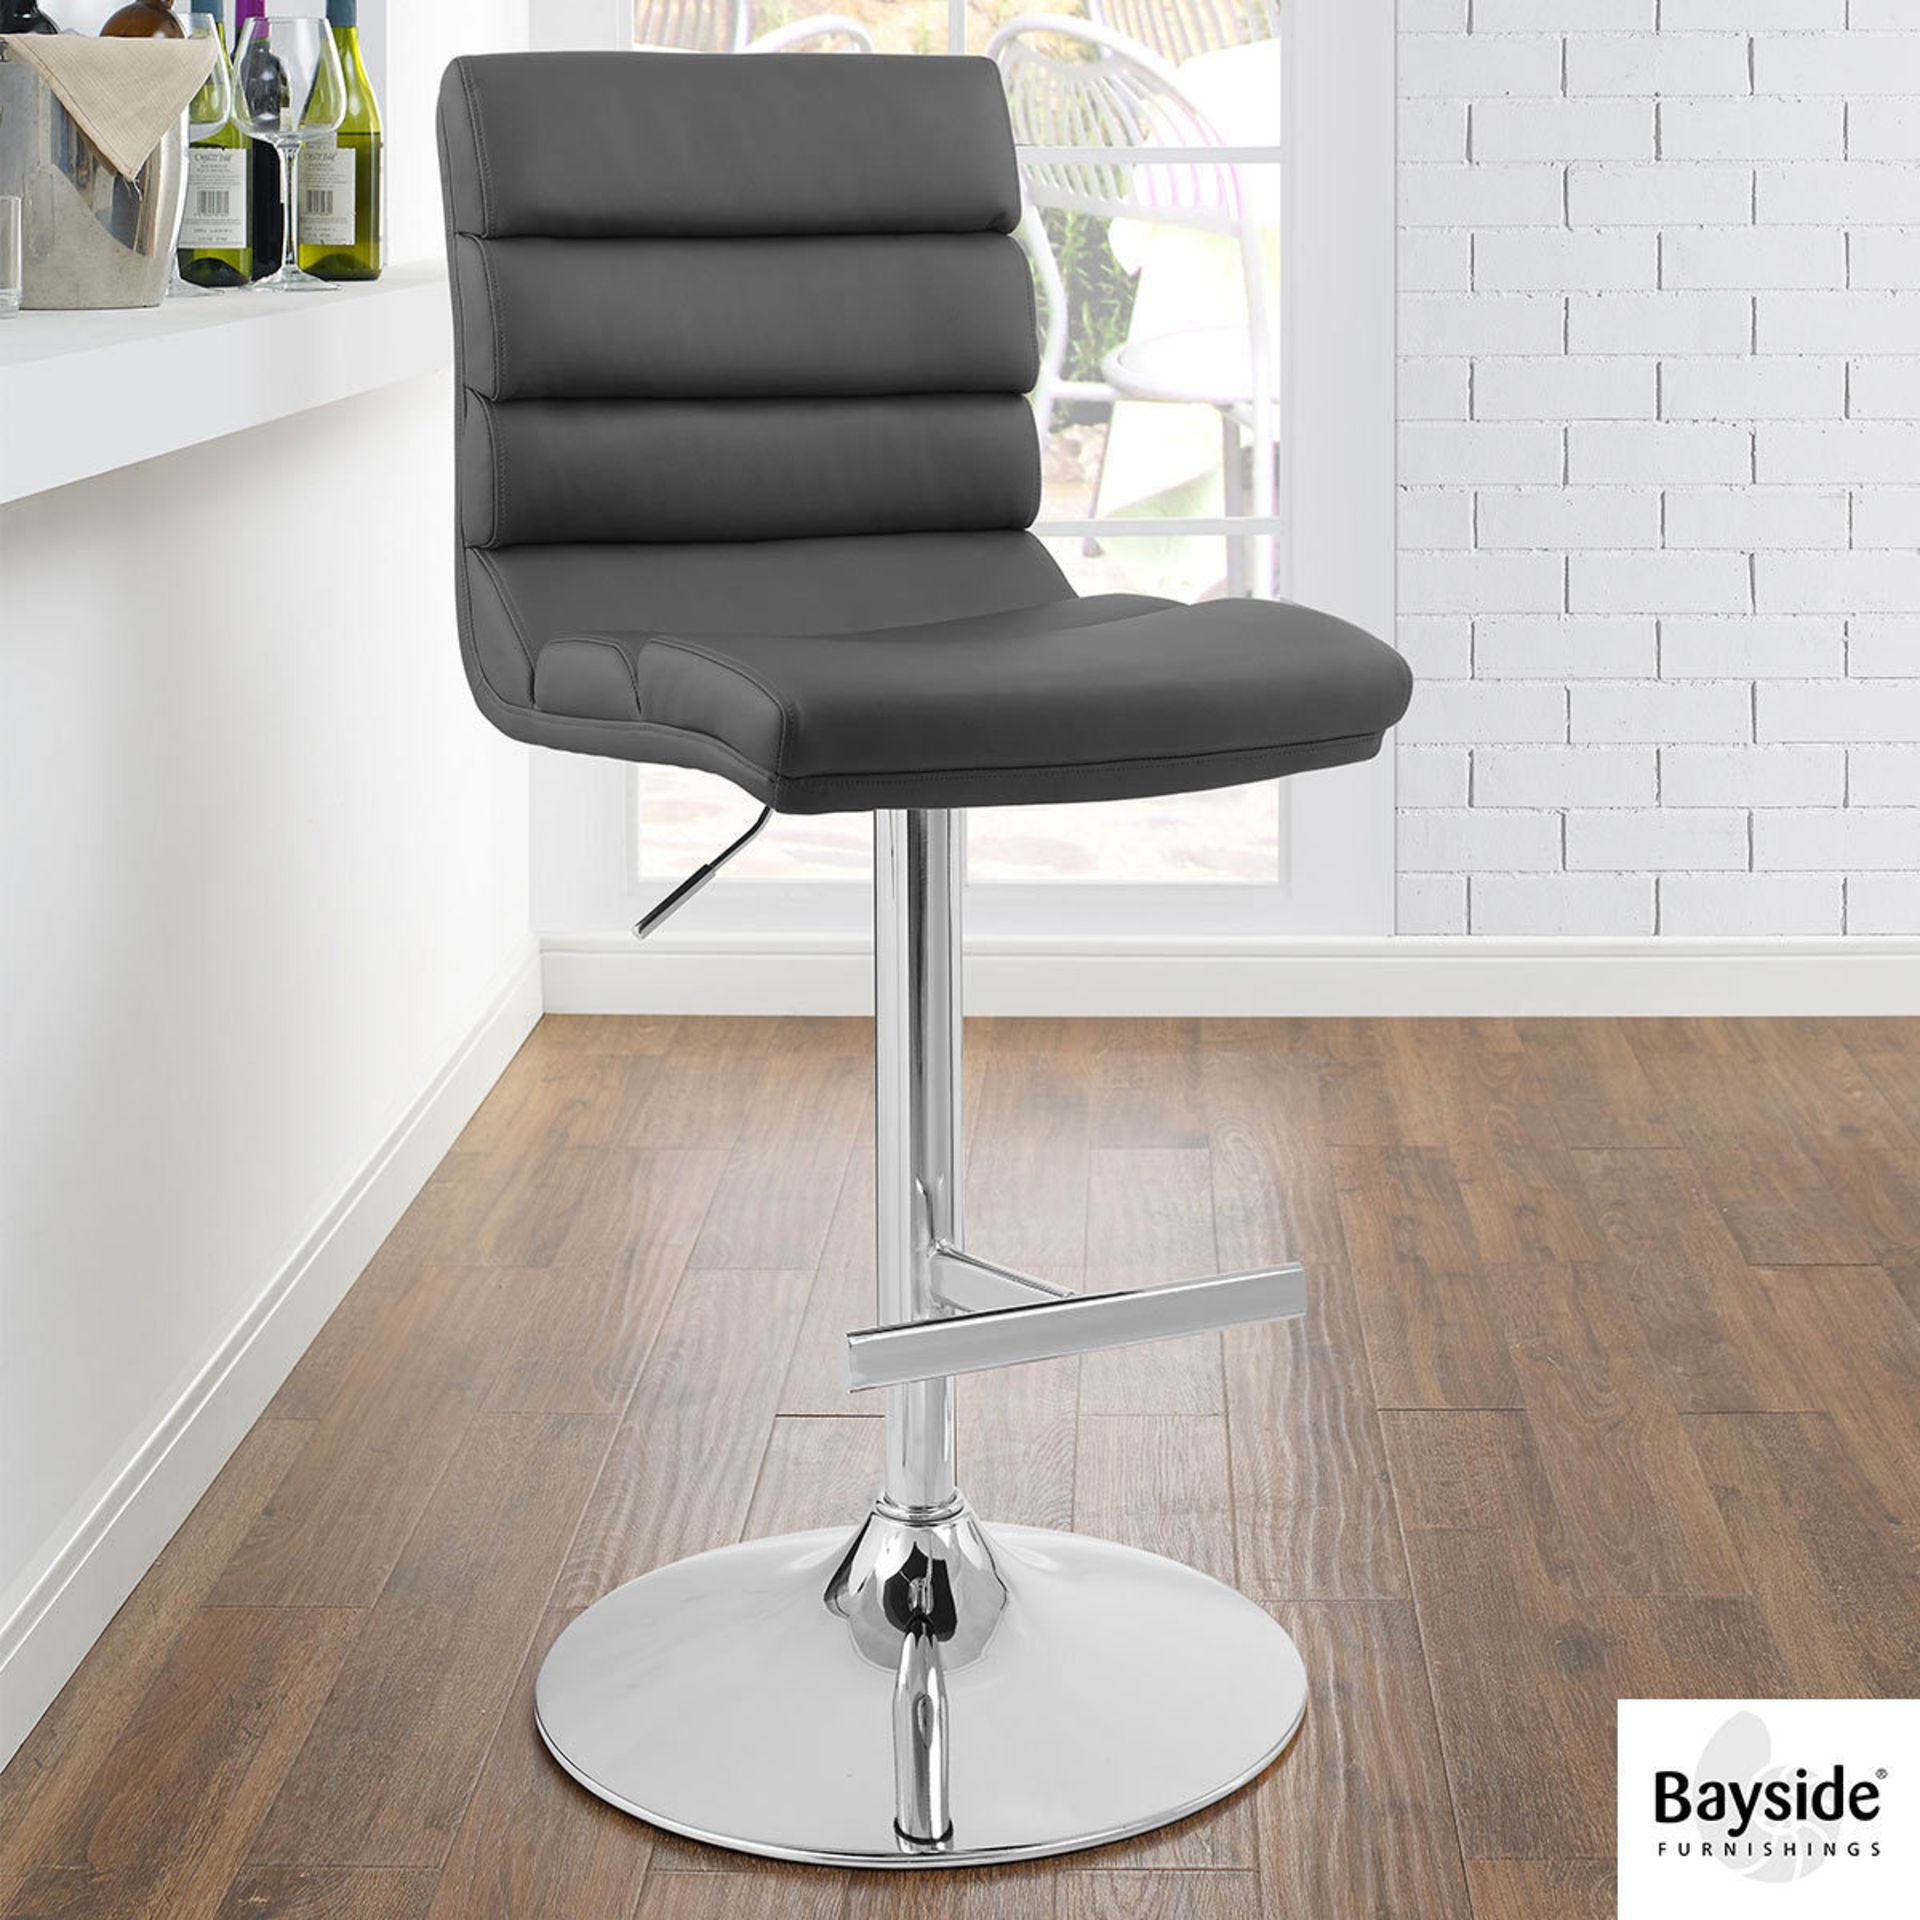 1 BAYSIDE FURNISHINGS GREY FAUX LEATHER GAS LIFT BAR STOOL RRP Â£119.99 (GENERIC IMAGE GUIDE)